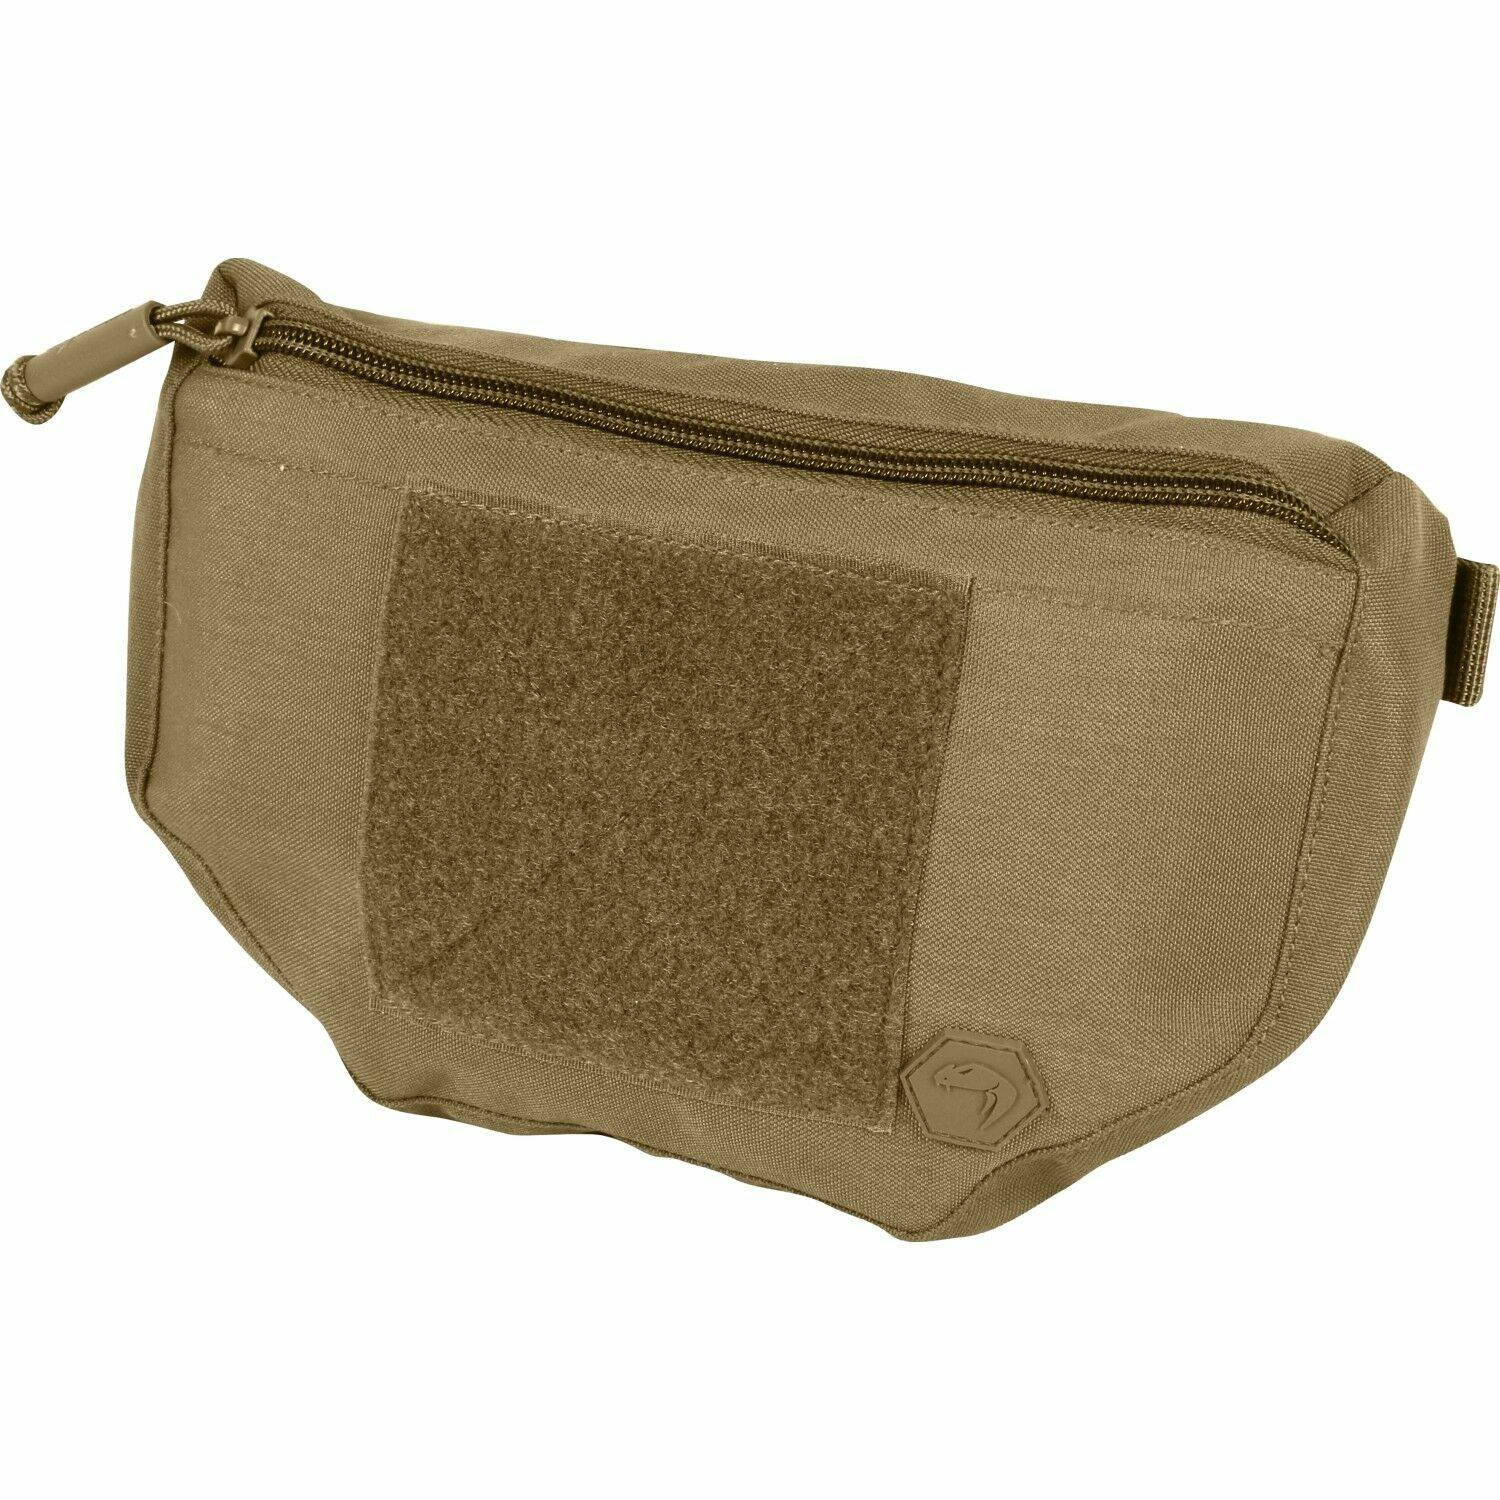 Viper Scrote Pouch Pack Black Tactical Belt Bag Country Hunting Shooting 